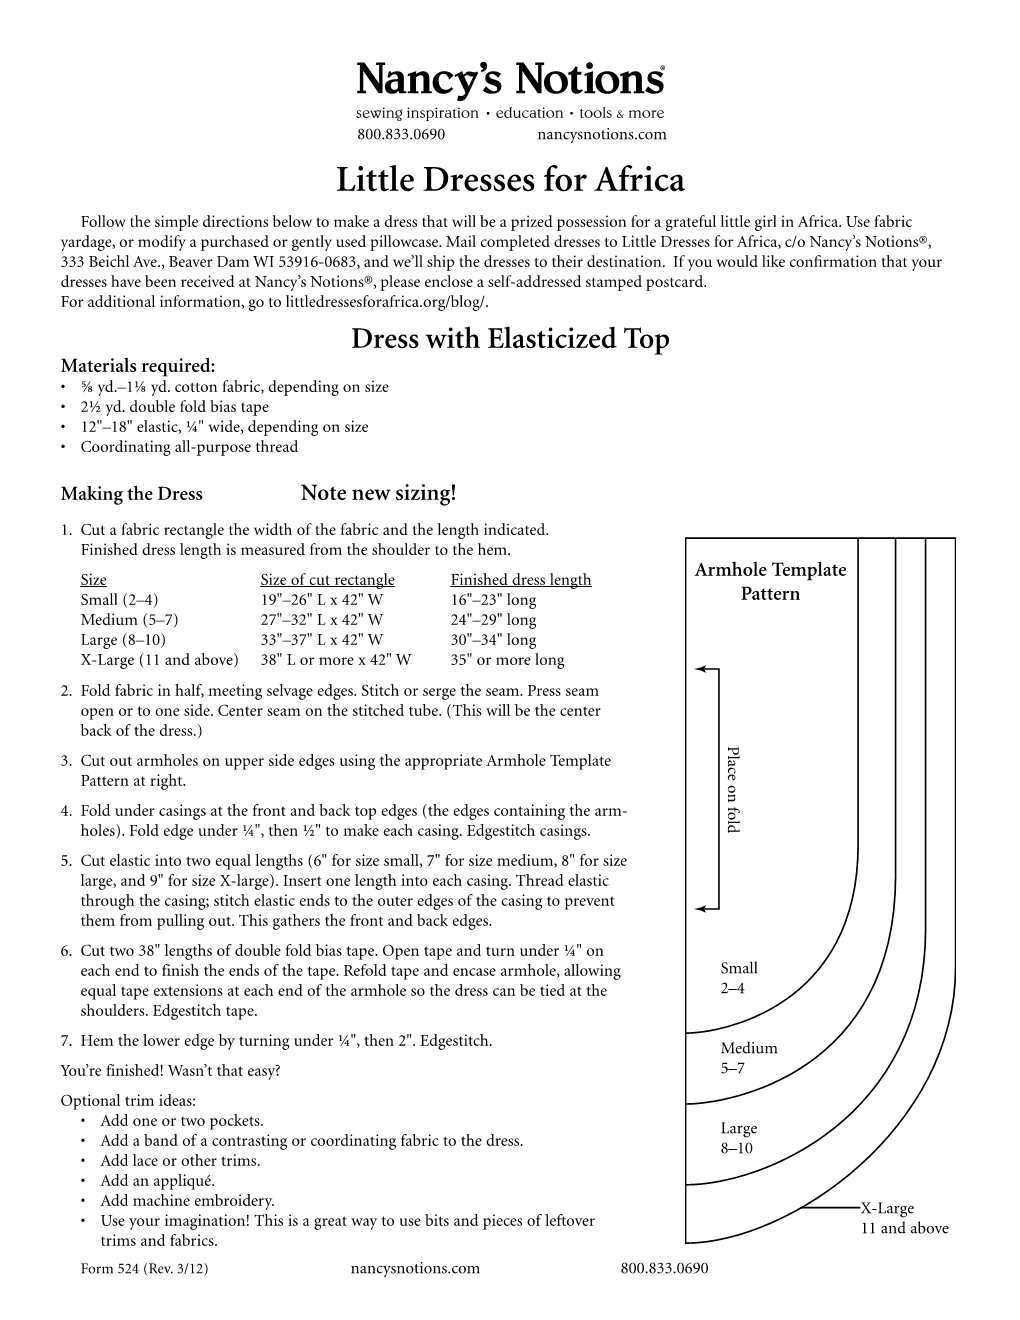 Little Dresses for Africa Follow the Simple Directions Below to Make a Dress That Will Be a Prized Possession for a Grateful Little Girl in Africa